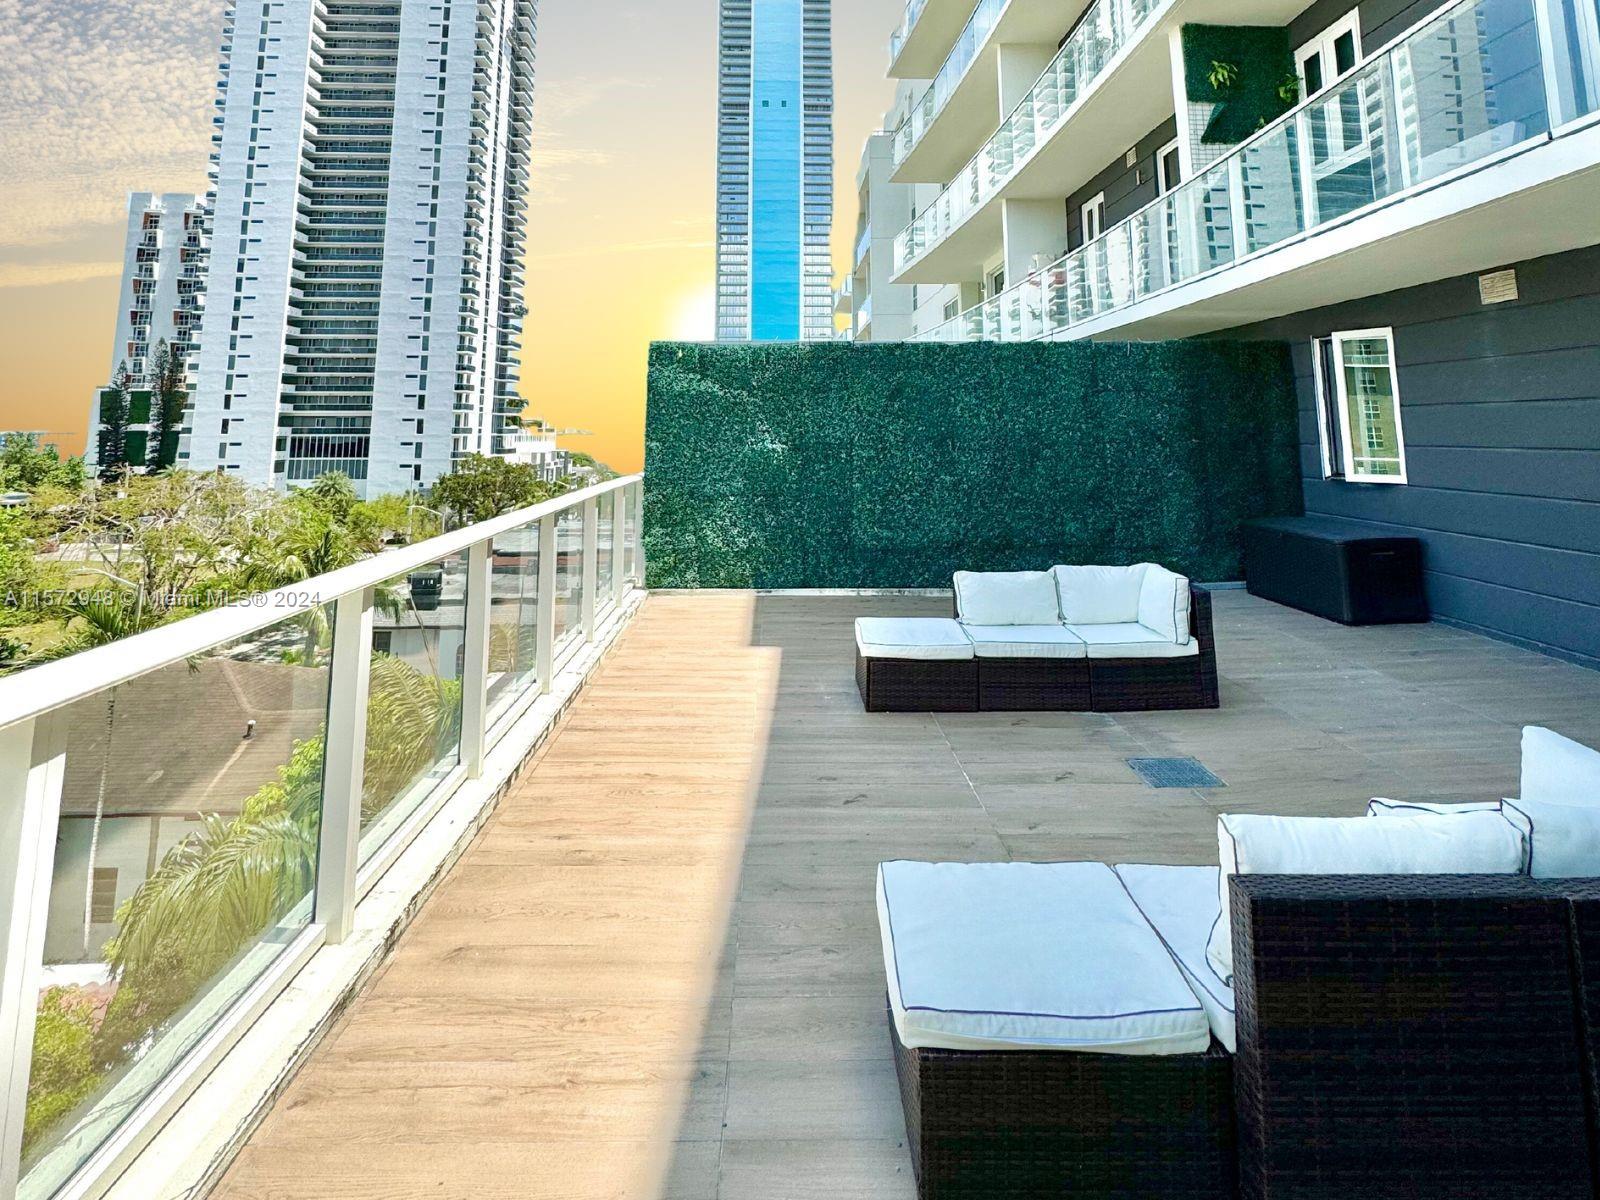 Welcome to the vibrant neighborhood of Edgewater in Miami! This stunning condo comes fully furnished
& fully equipped. Ideal for convenience, comfort, & captures the essence of modern luxury living. One of a kind
expansive balcony terrace & amenities that will truly elevate your lifestyle. Great inviting space for entertaining
guests or simply enjoying a peaceful evening while providing breathtaking views. The building offers an exclusive
rooftop pool & fitness room. Location is key, you'll find yourself at the center of it all, with easy access to Midtown,
Brickell, the Design District, Wynwood, & the beach. Wi-fi included, ample parking available & pet-friendly. Full-
year lease preferred, seasonal rental OK. Let us help you make this dream residence a reality! Contact us today!